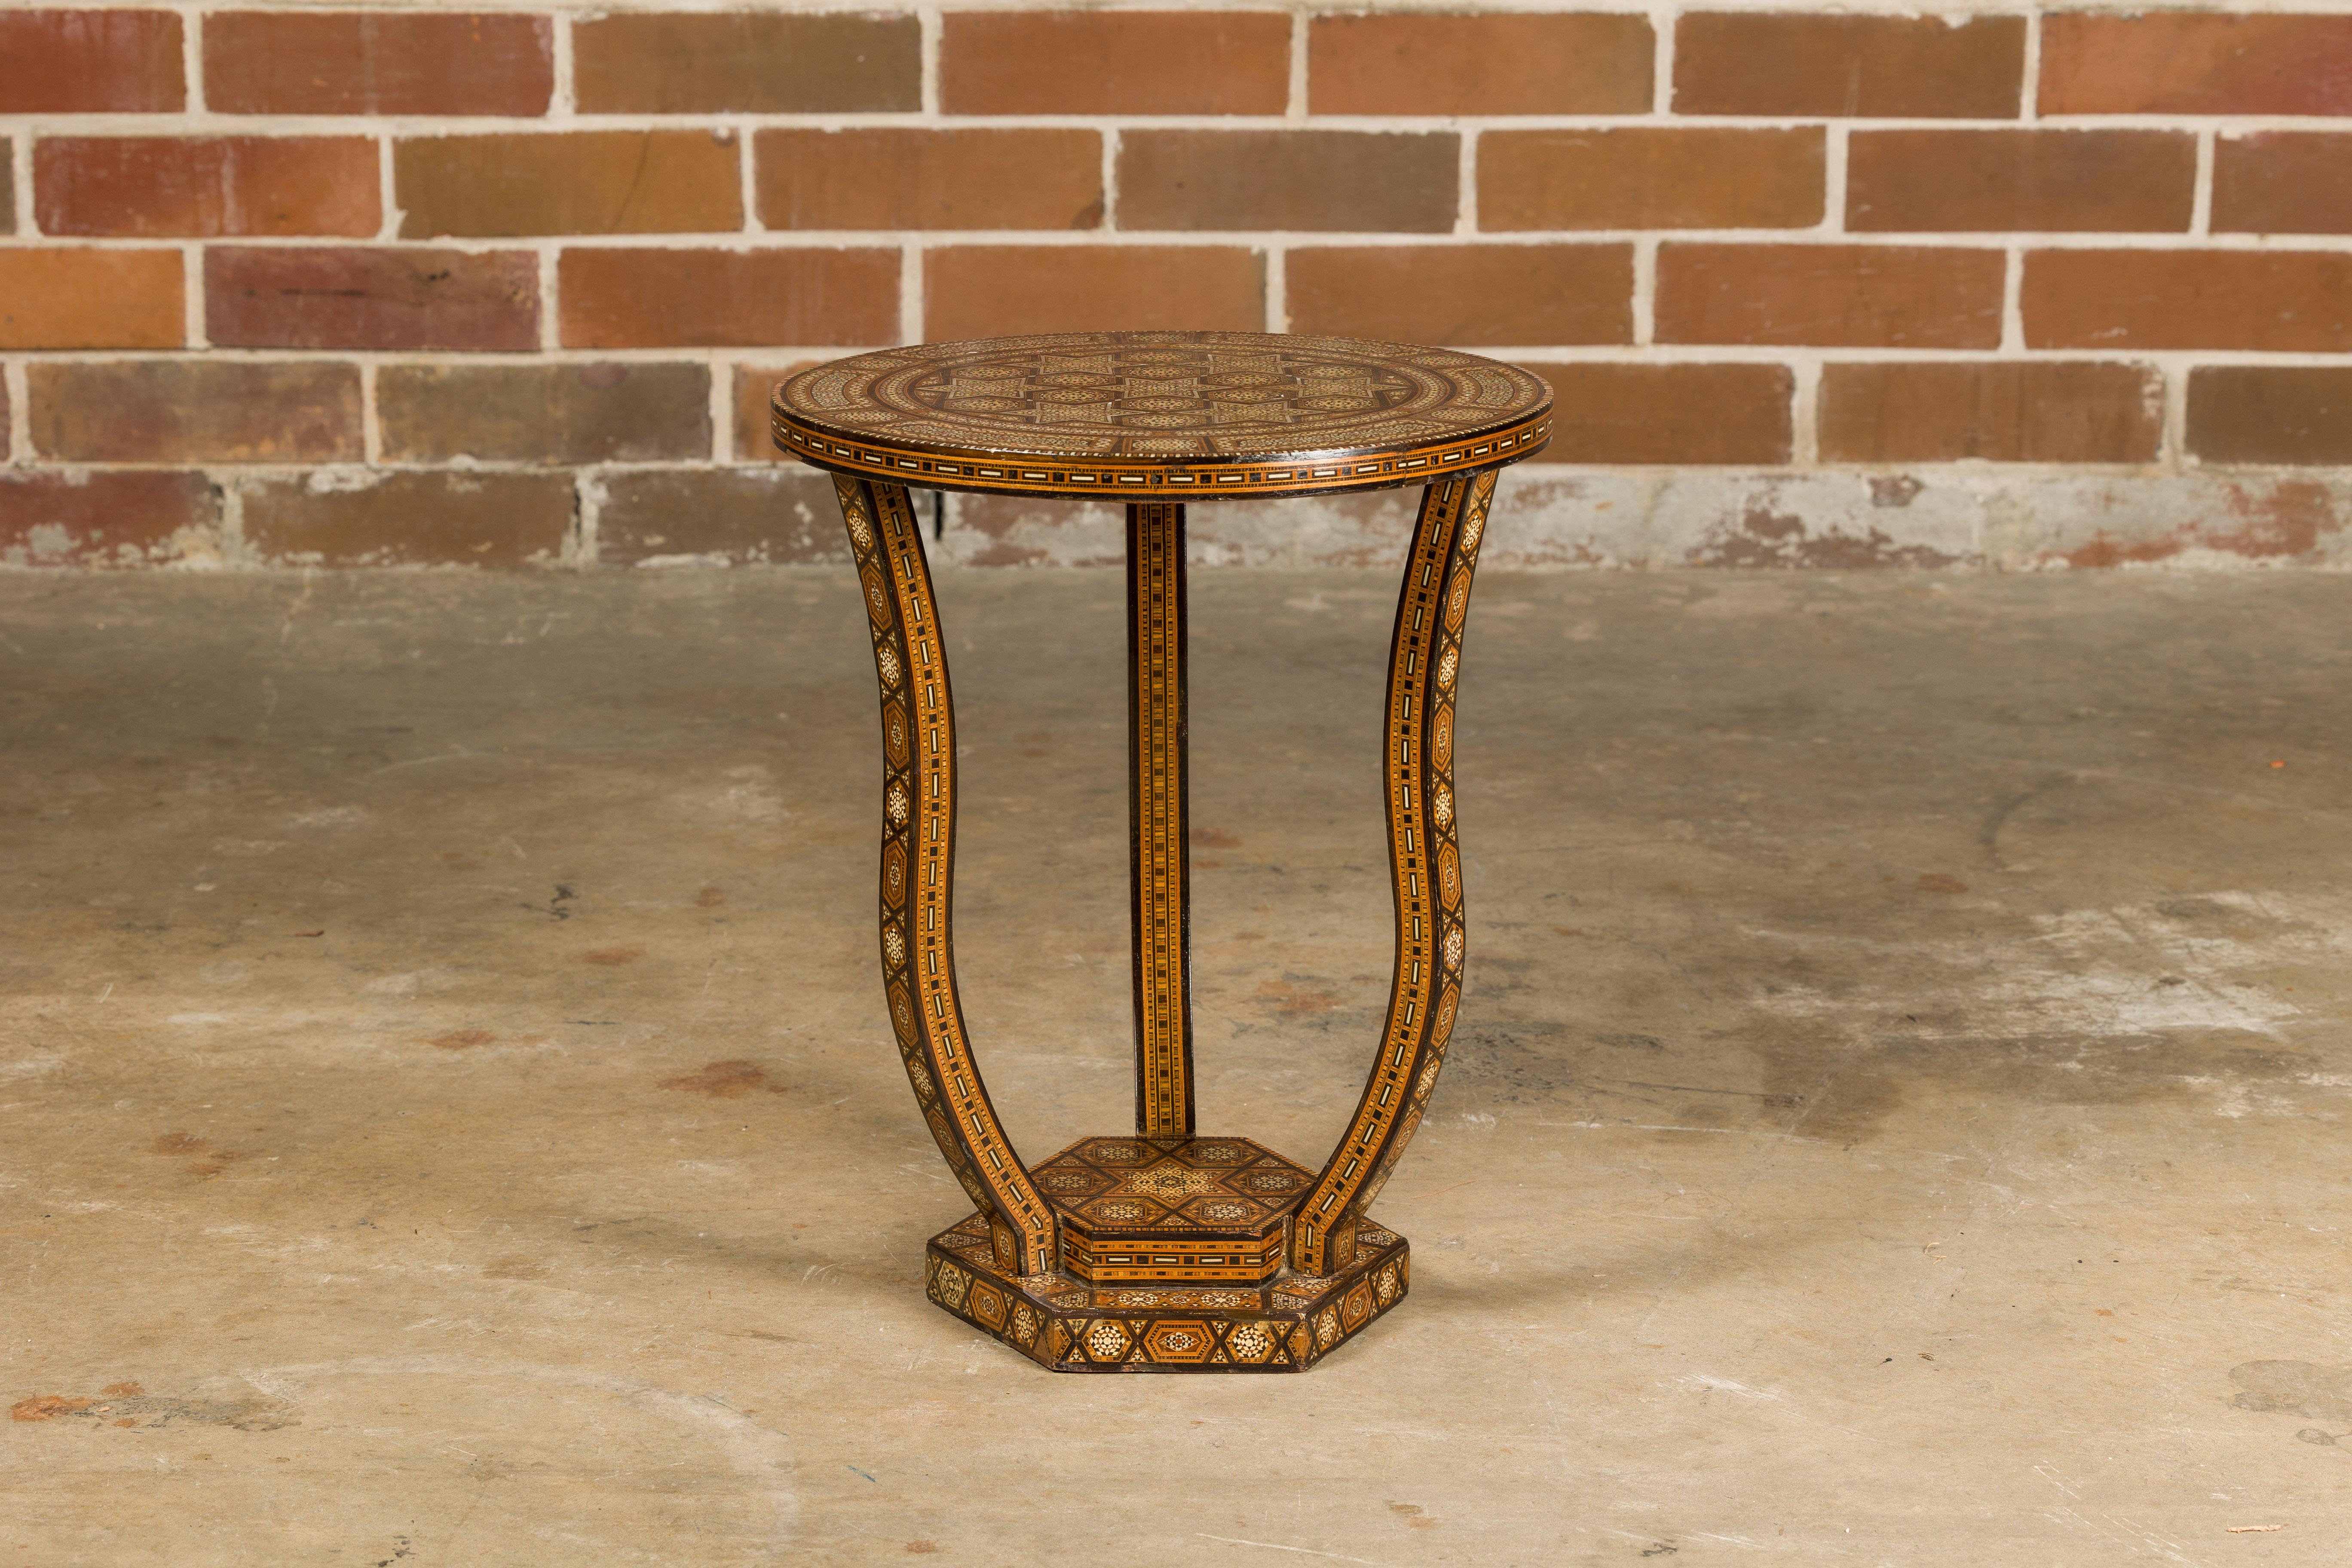 Moroccan 1900s Moorish Style Table with Geometric Bone Inlay and Curving Legs In Good Condition For Sale In Atlanta, GA